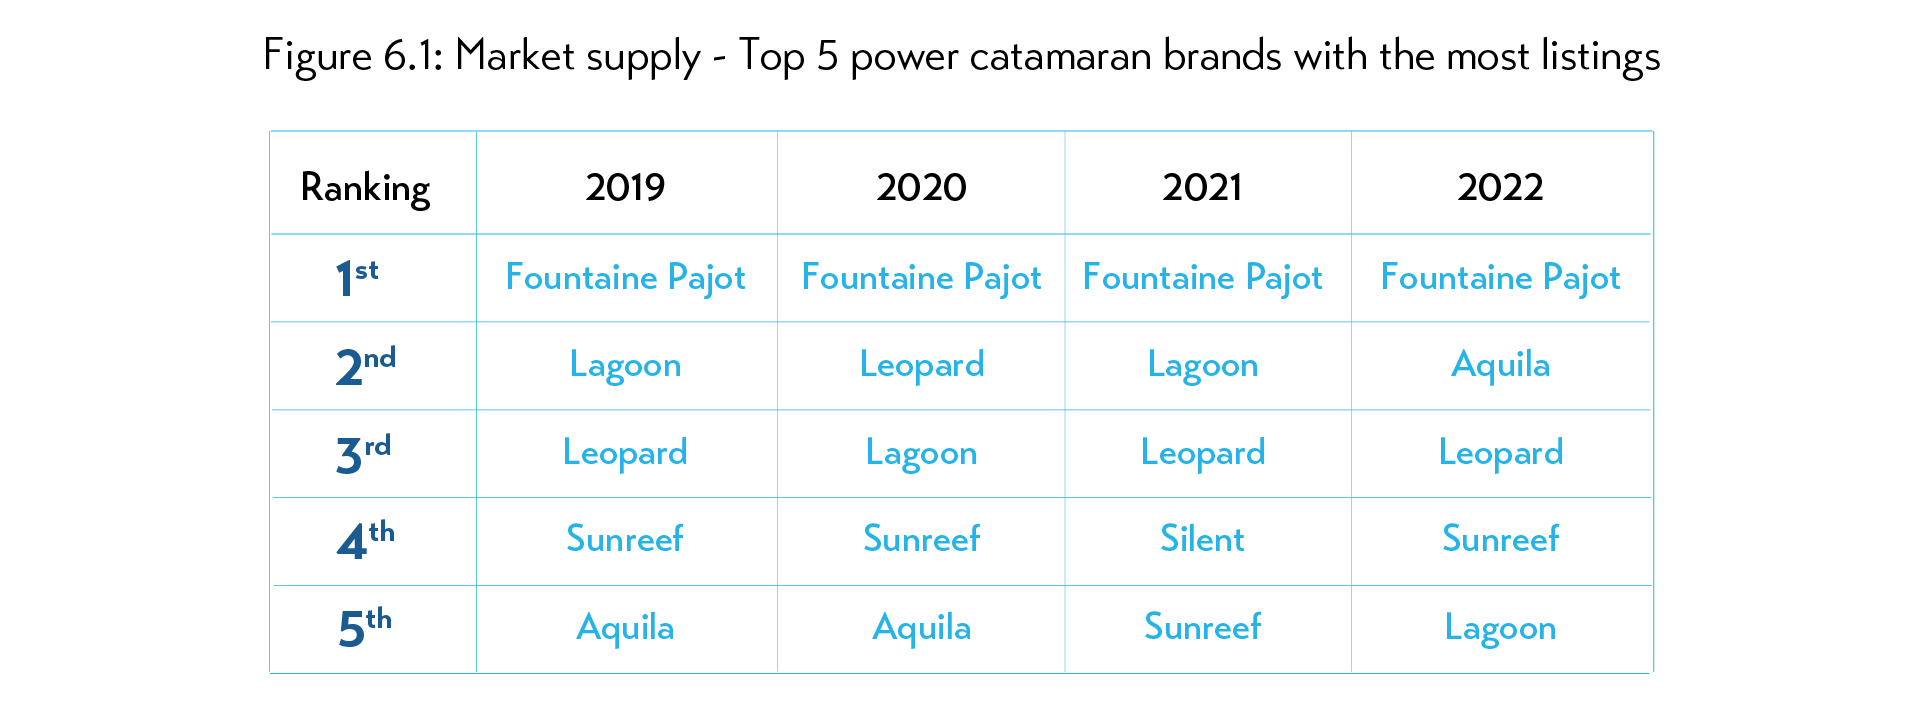 Market supply - Top 5 power catamaran brands with the most listings